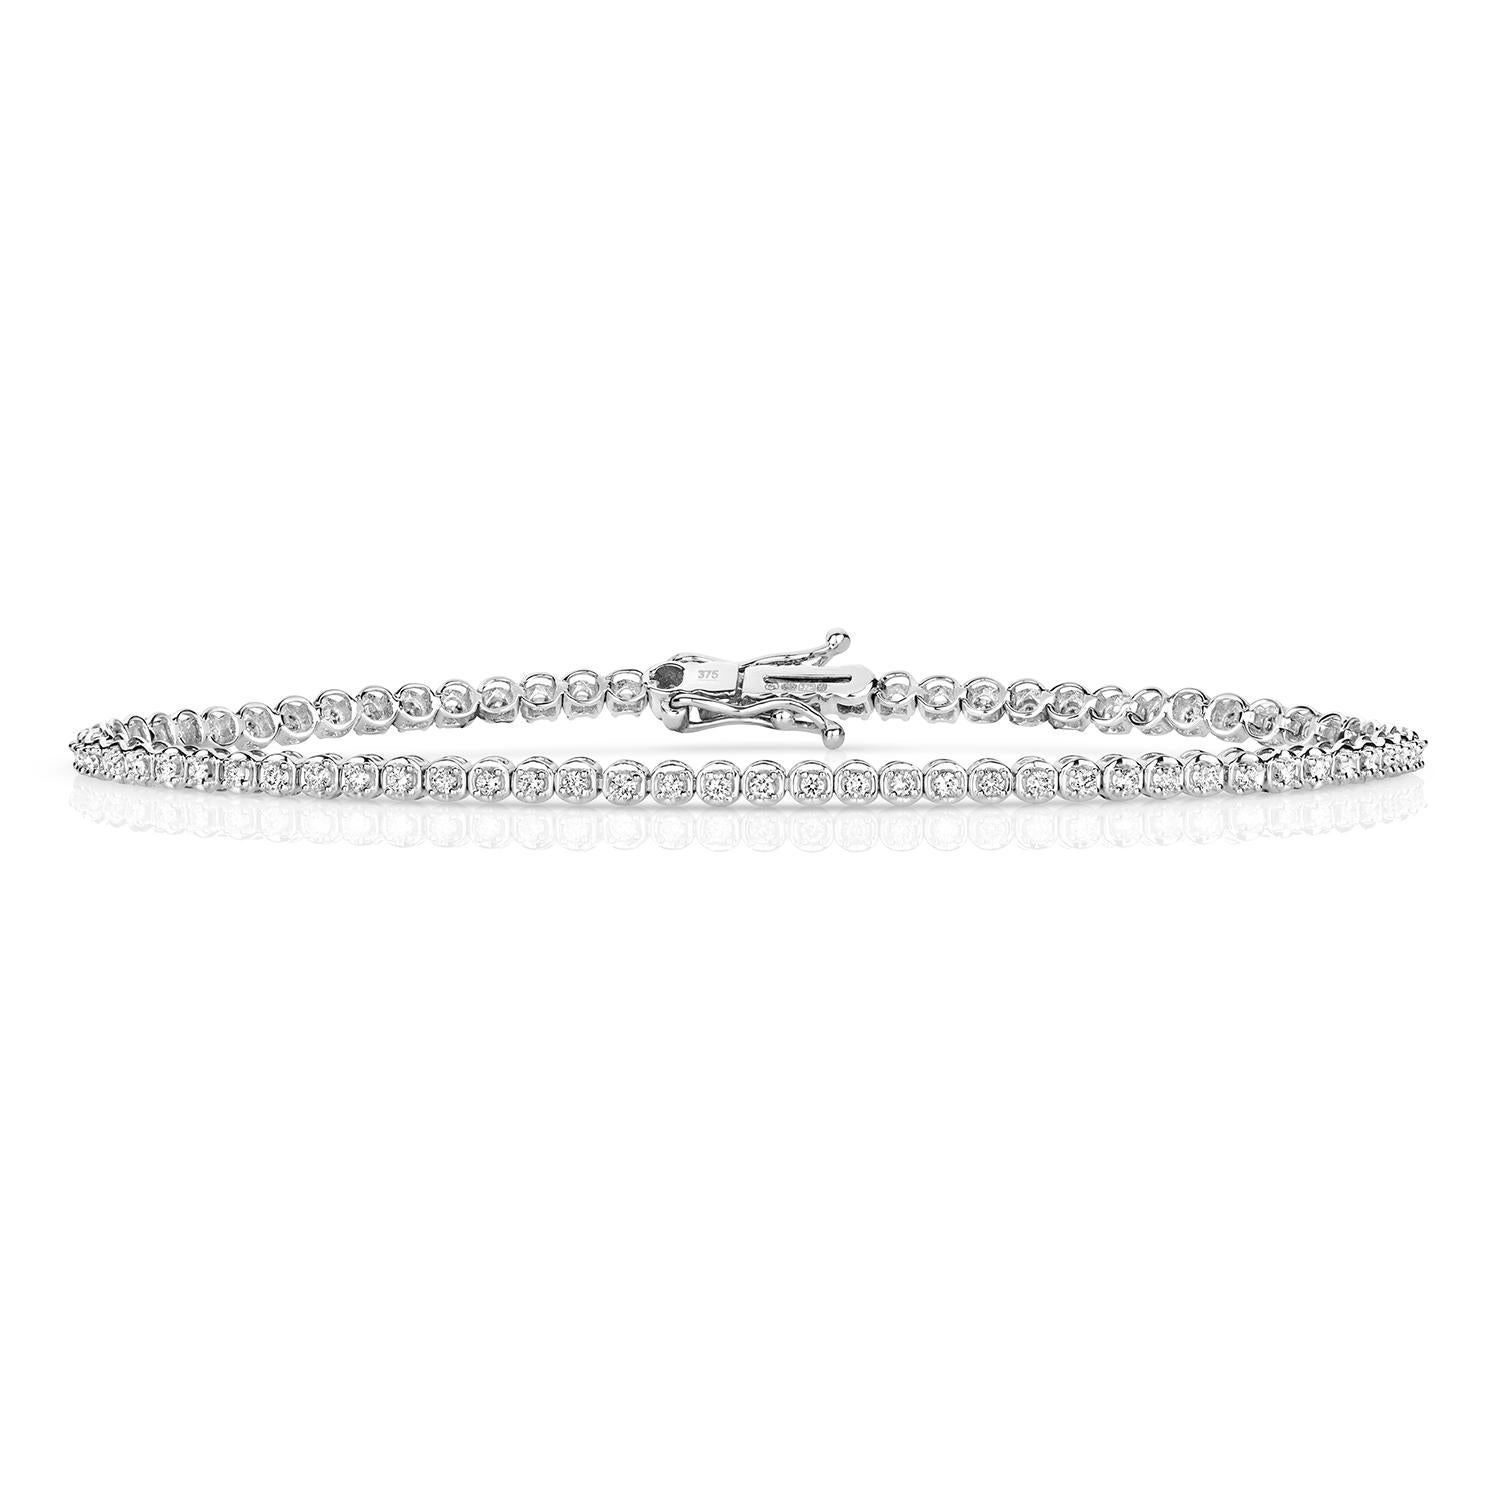 DIAMOND BRACELET

9CT W/G HI I1 0.75CT

Weight: 4g

Number Of Stones:74

Total Carates:0.750